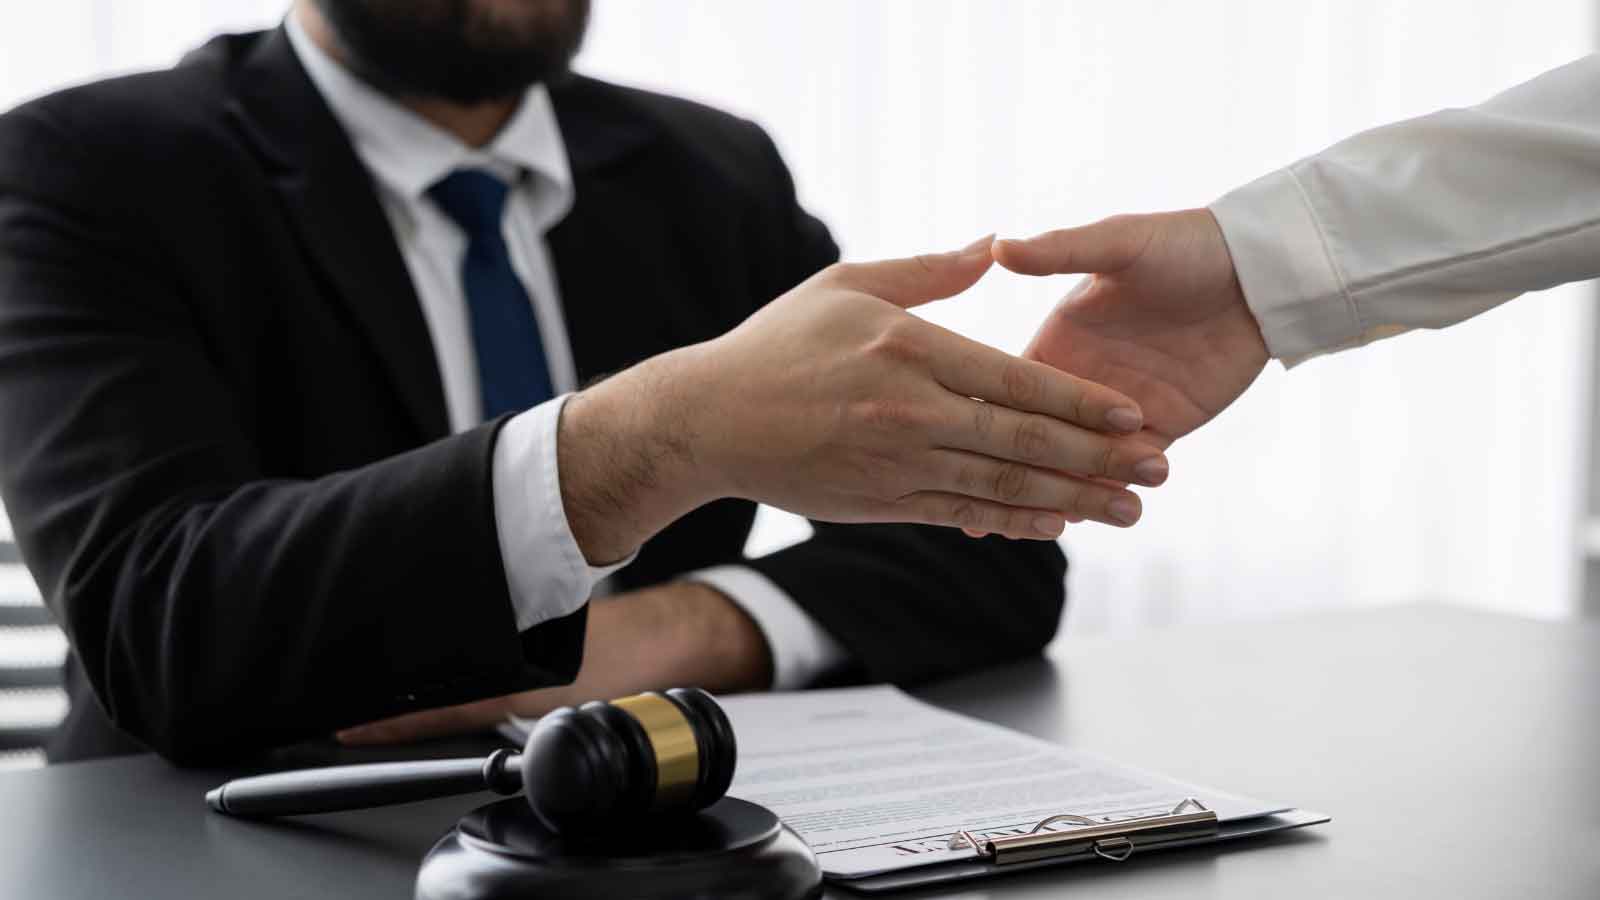 A handshake over a desk with legal papers and a gavel, signifying a legal agreement